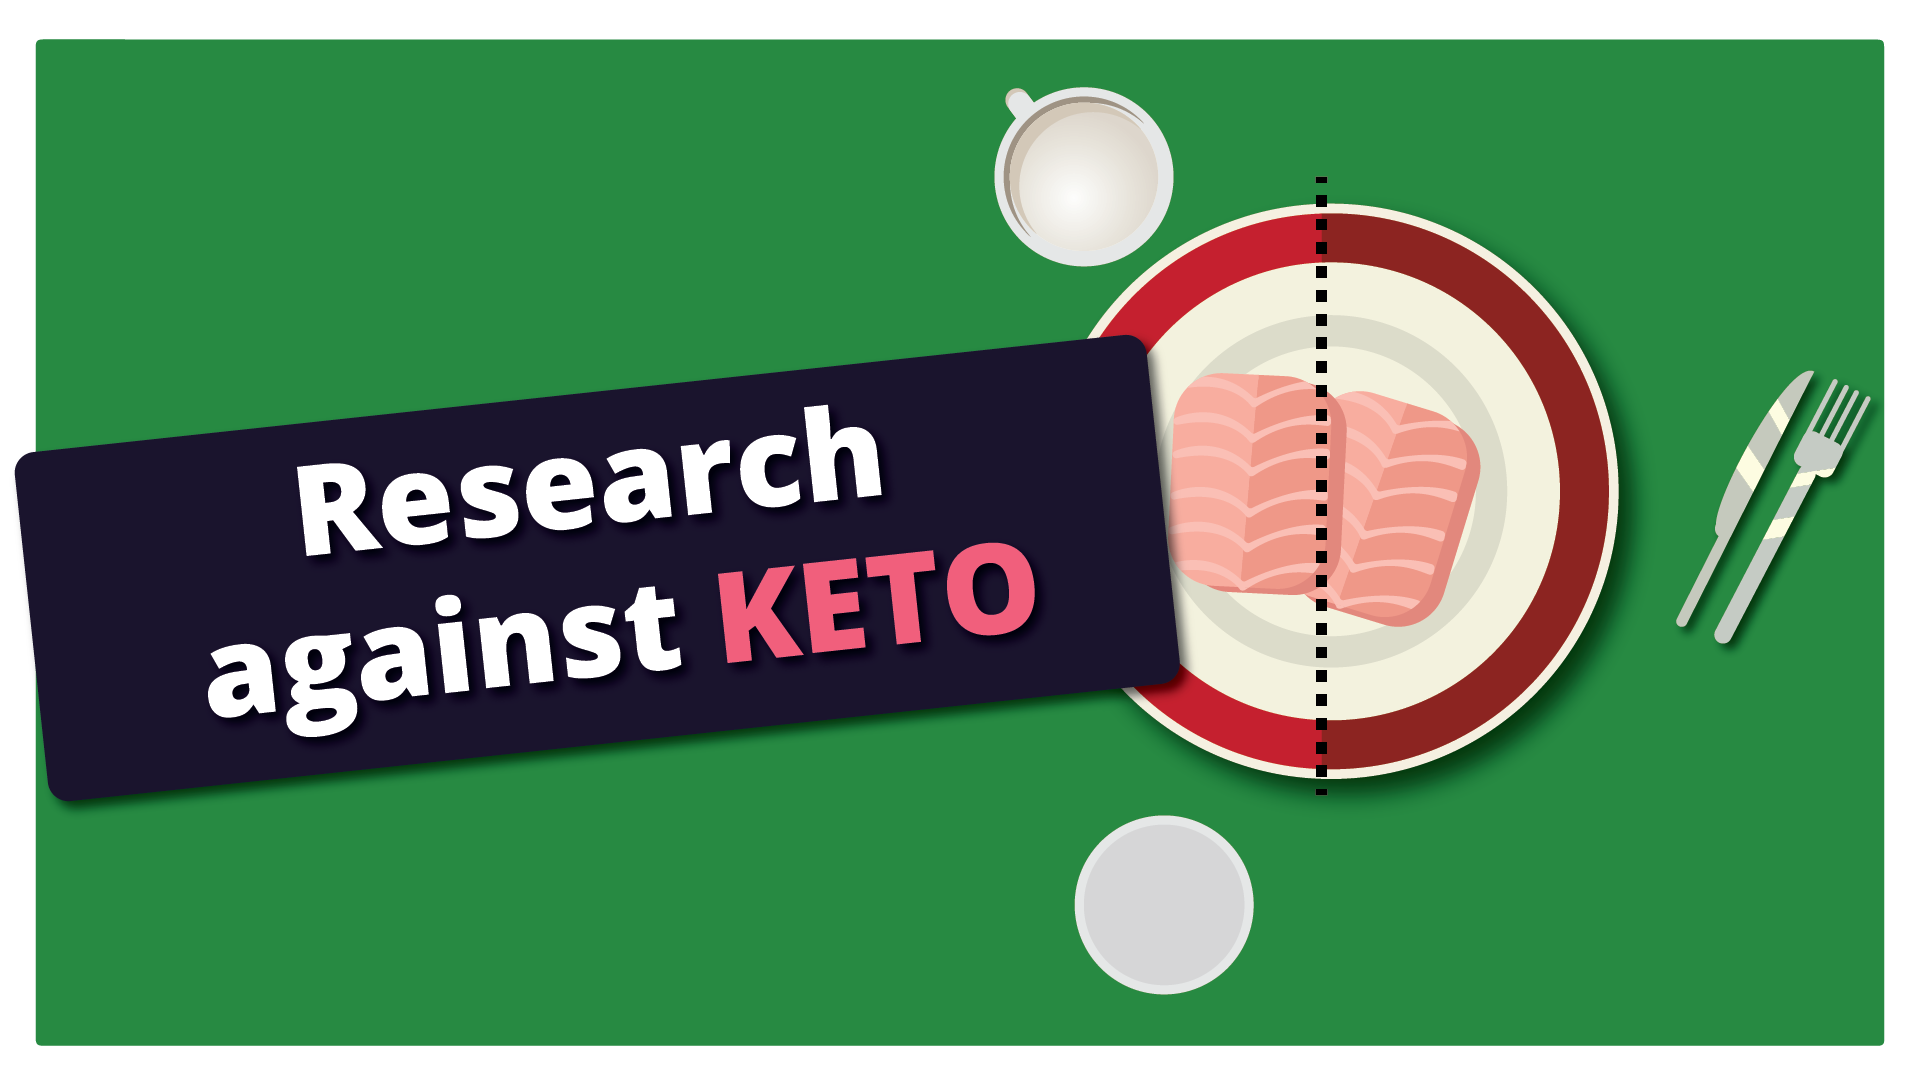 research against keto diet-01